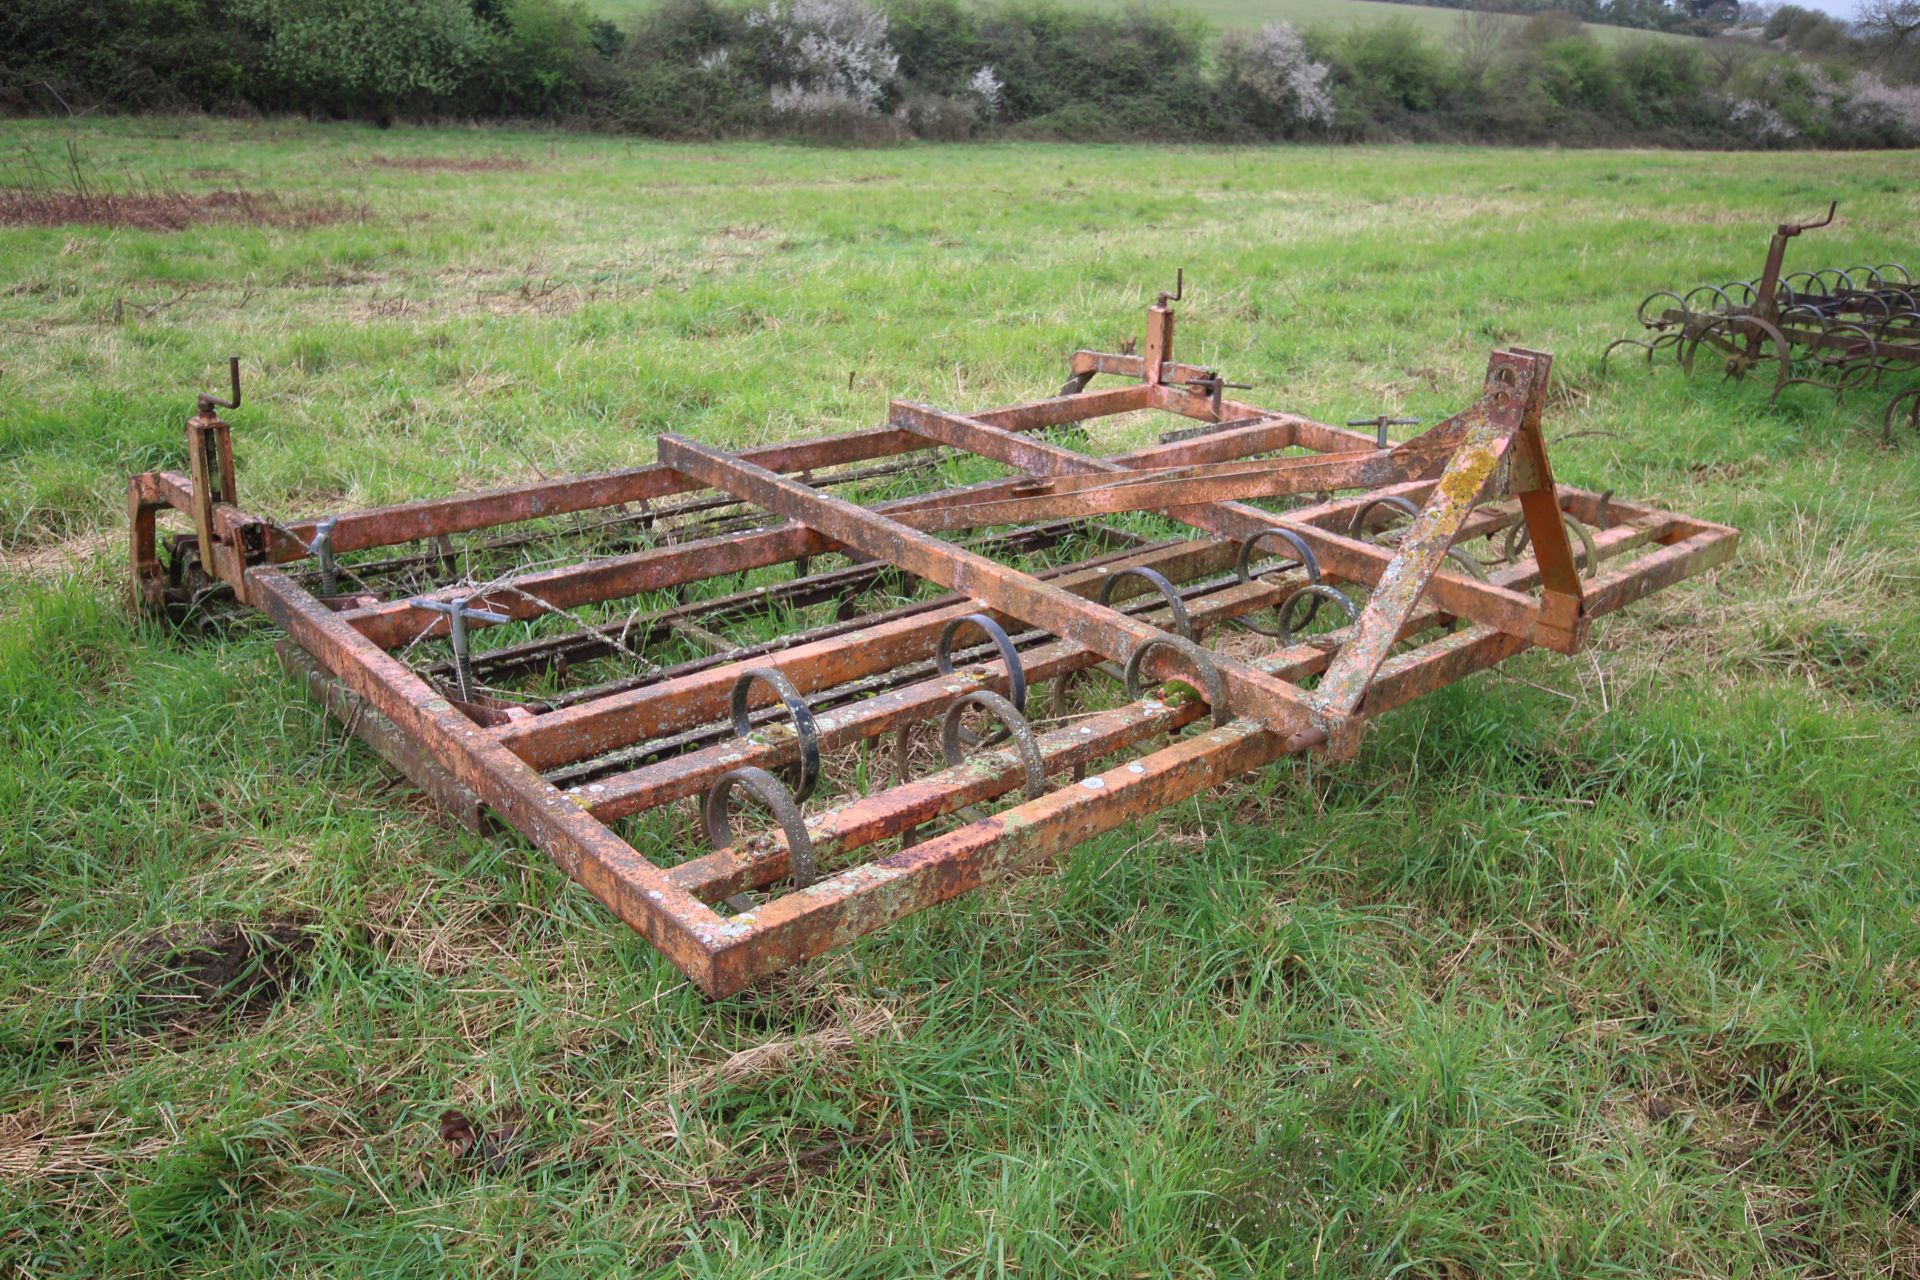 Blench 10ft mounted combination harrow. Comprising two rows spring tines, four rows Dutch harrow